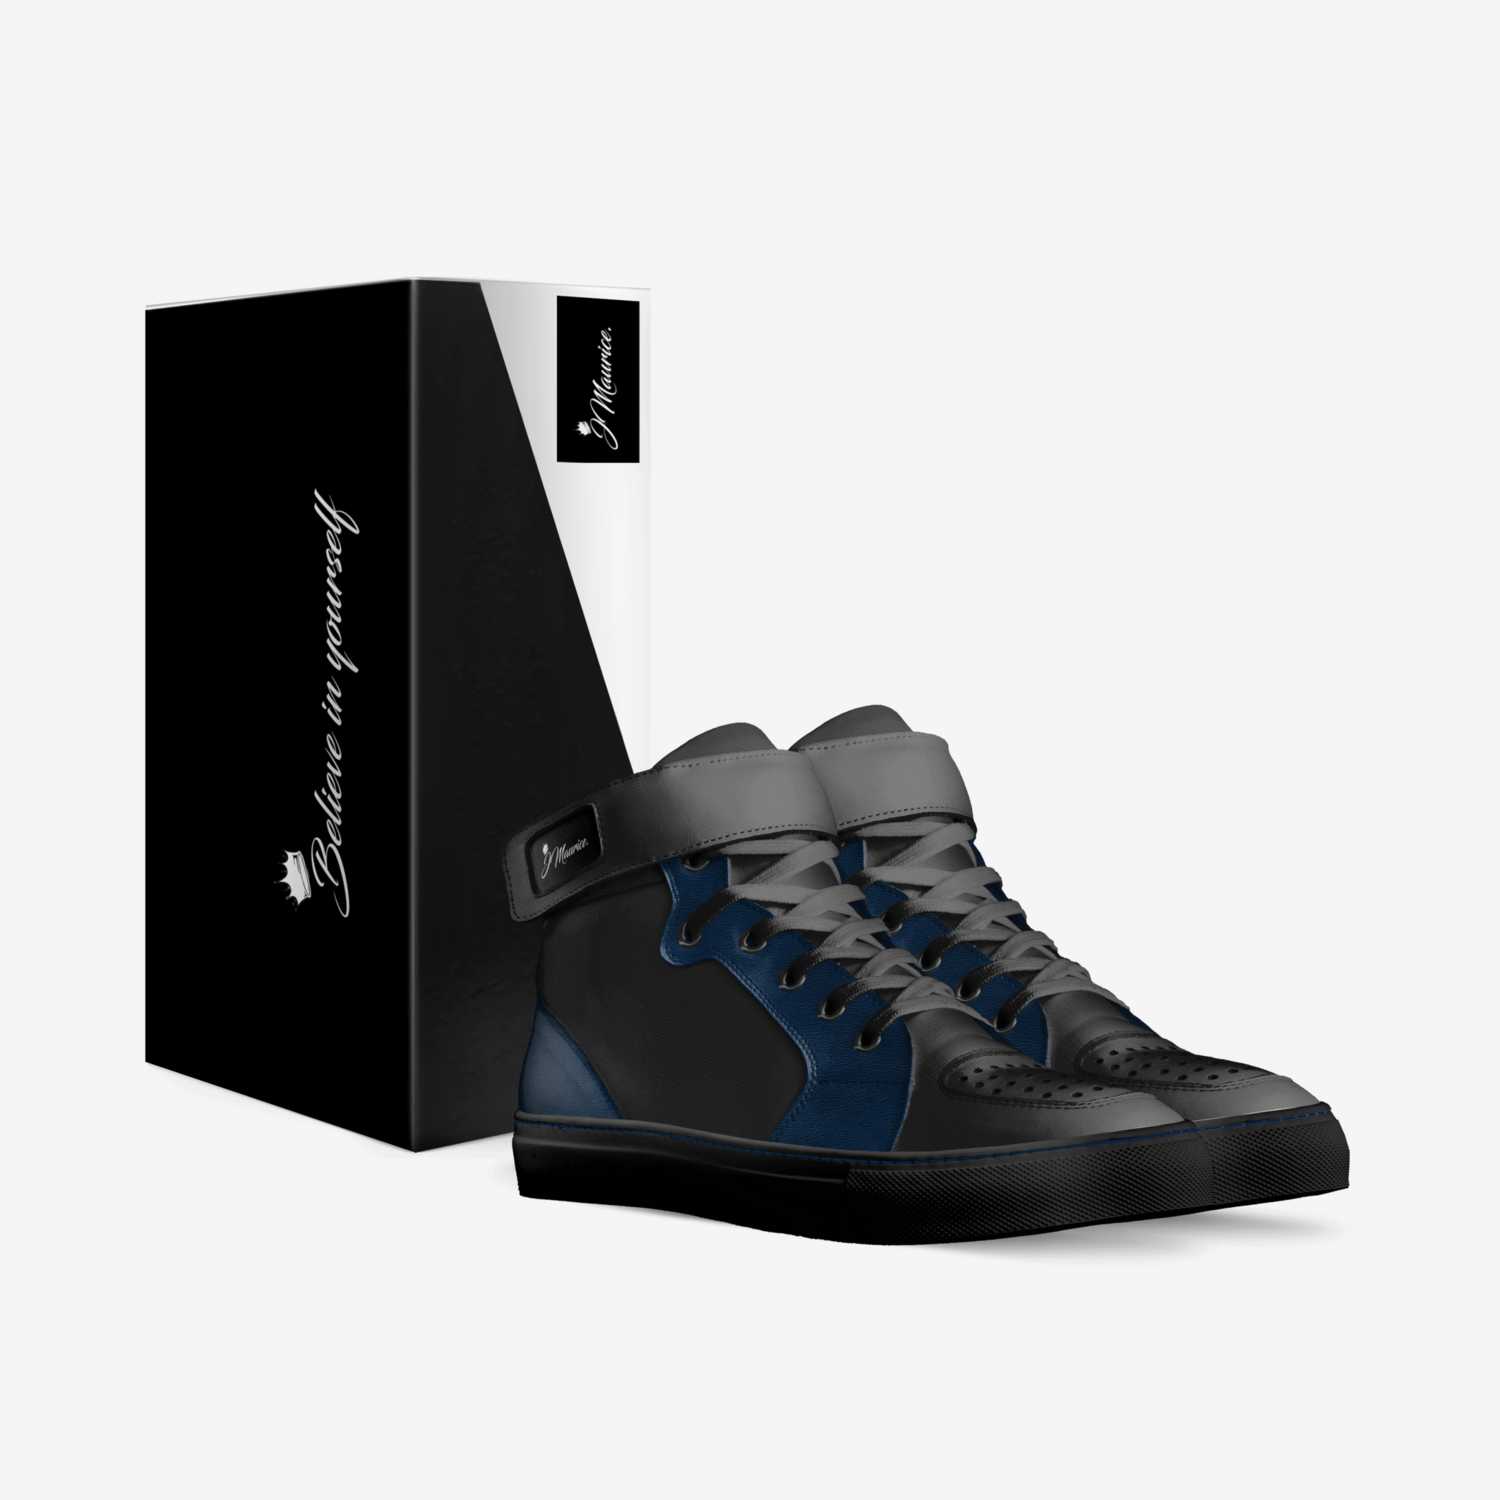 Jmaurice custom made in Italy shoes by Jason Brown | Box view